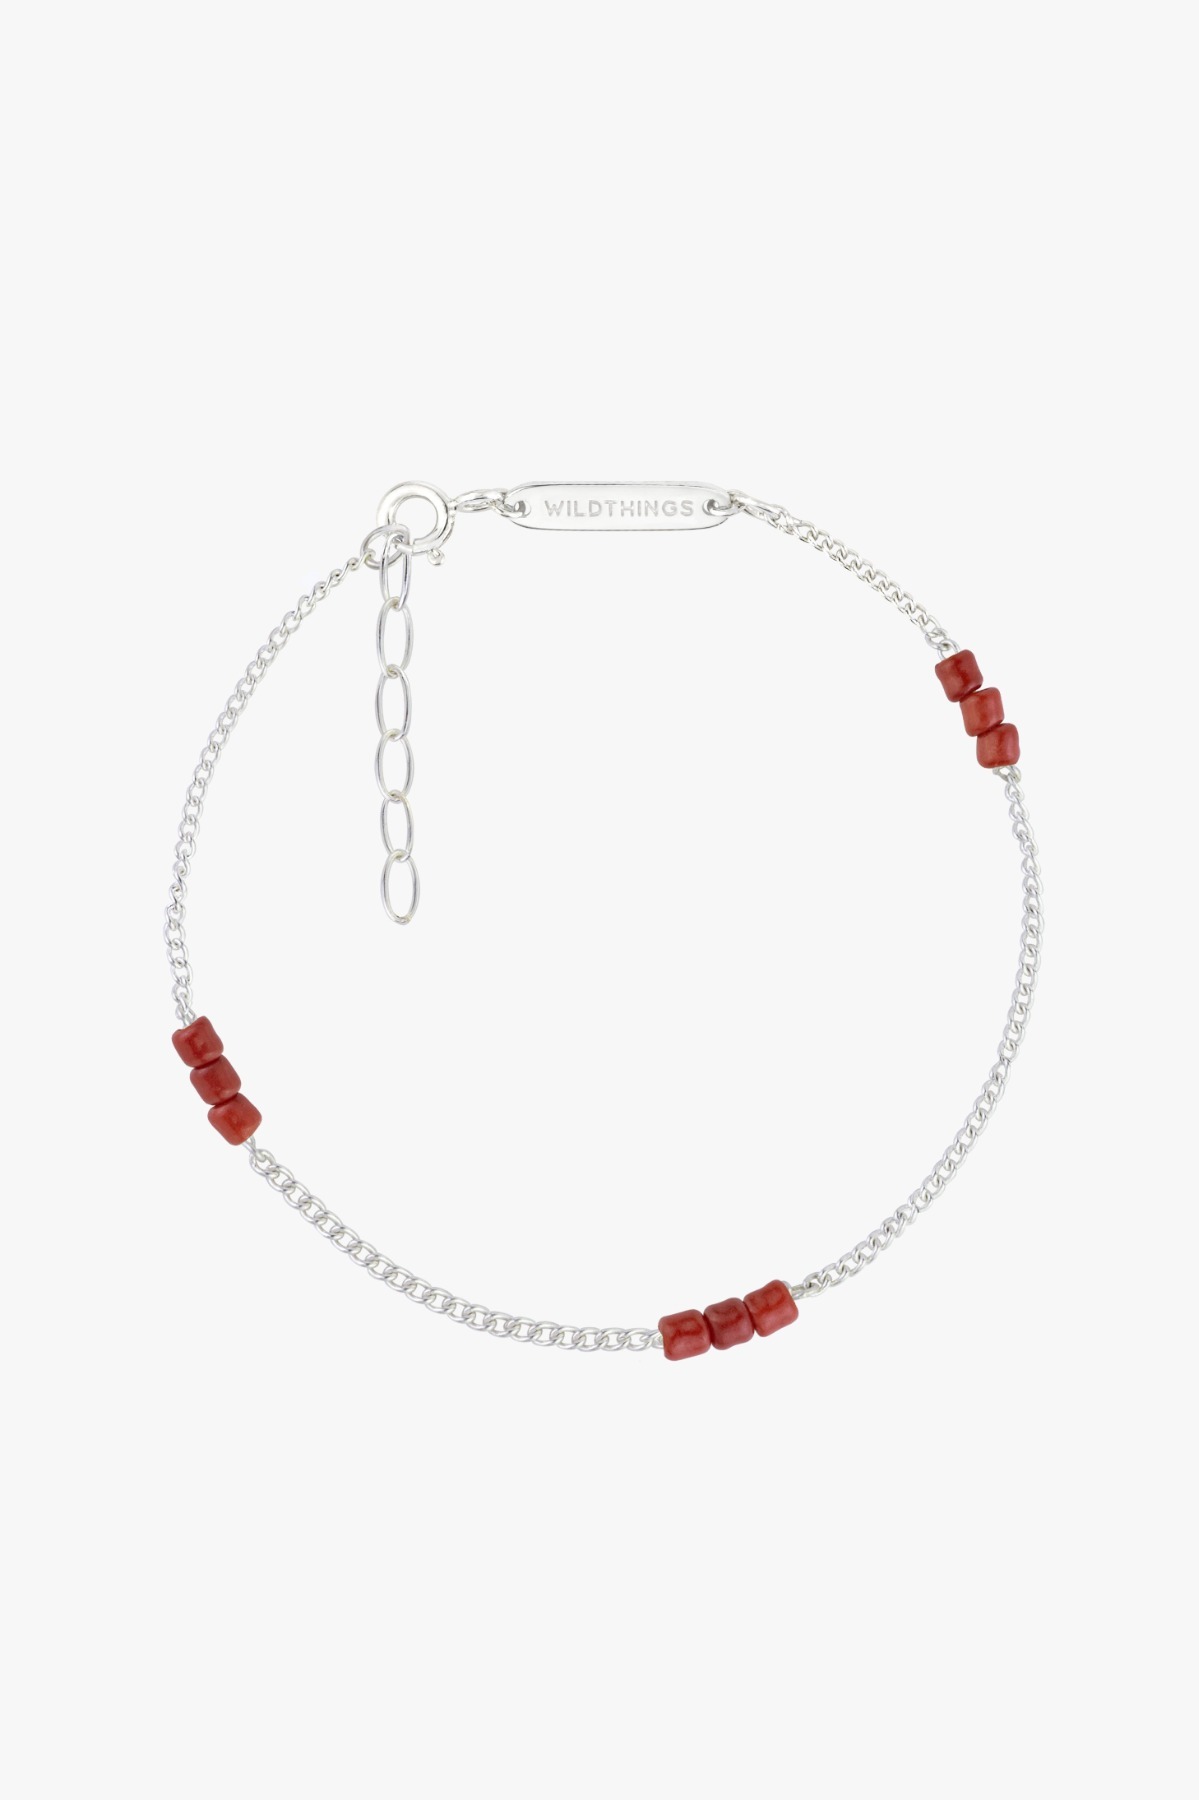 wildthings collectables - Triple red beads bracelet silver